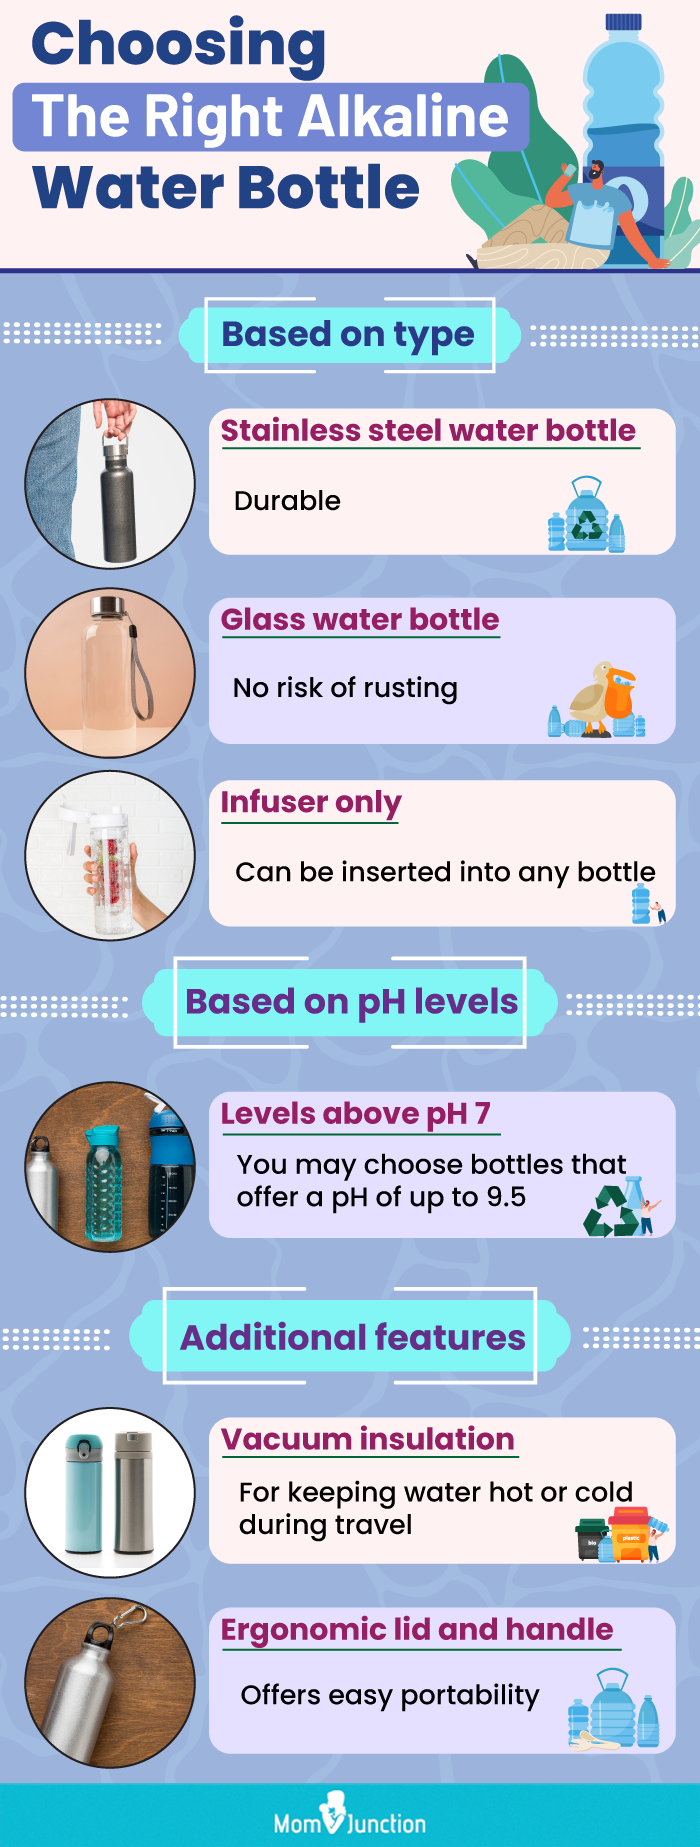 Choosing The Right Alkaline Water Bottle (infographic)